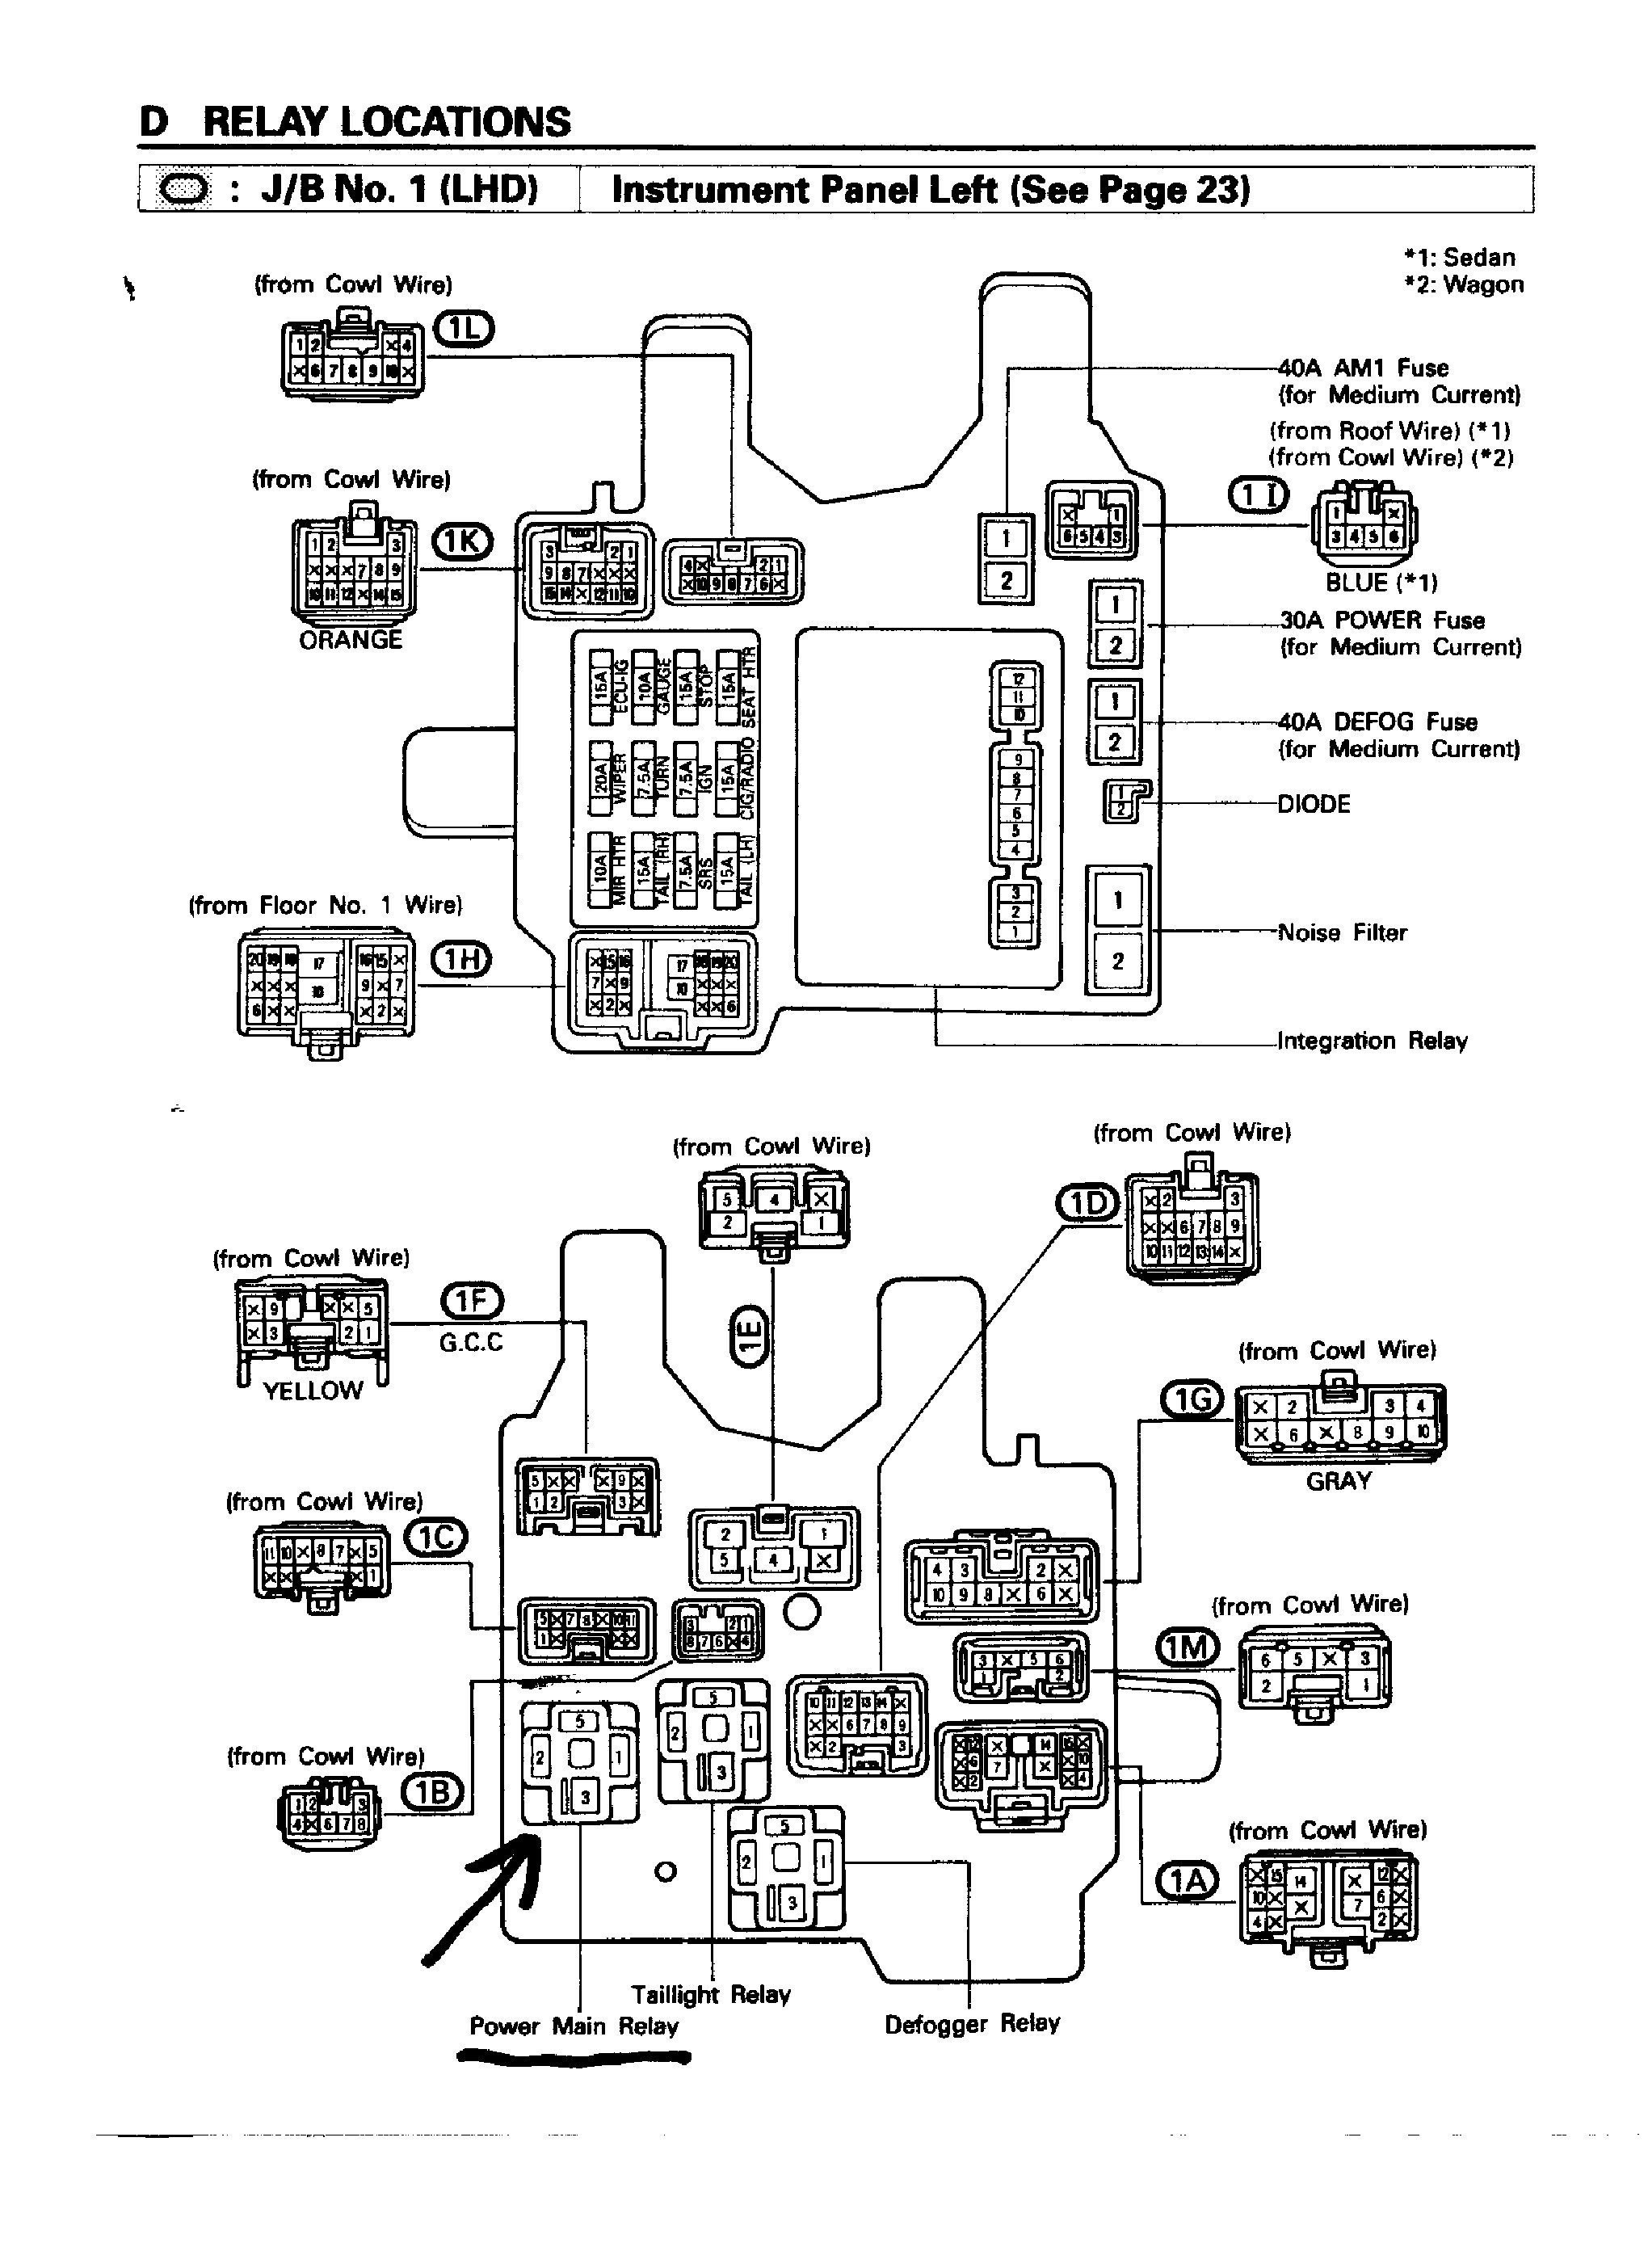 Wiring Diagrams for toyota Corolla Best 1993 toyota Corolla Wiring Diagram Manual Save toyota Camry